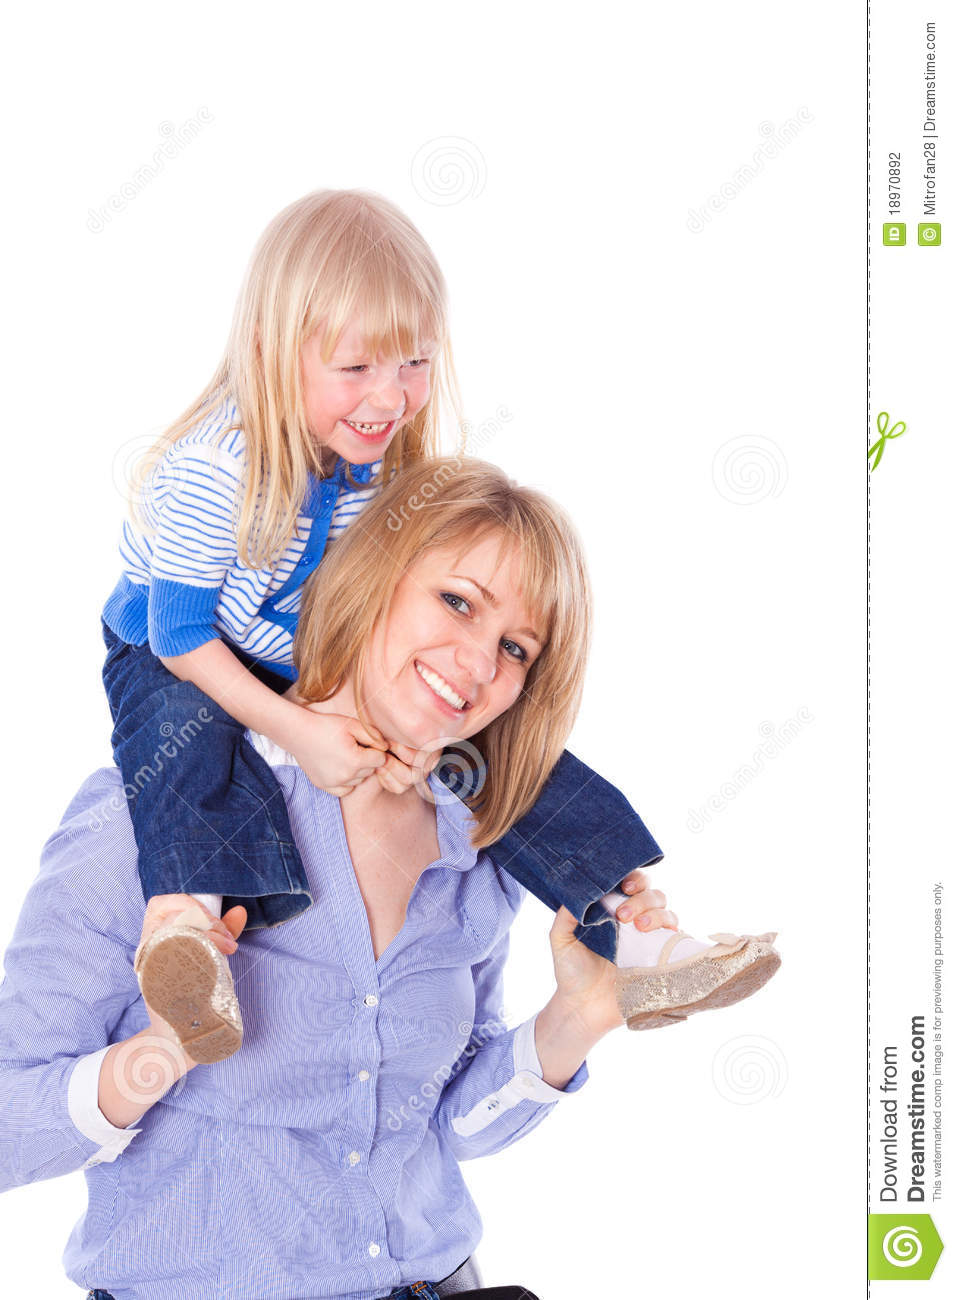 Child Smiling with Mom